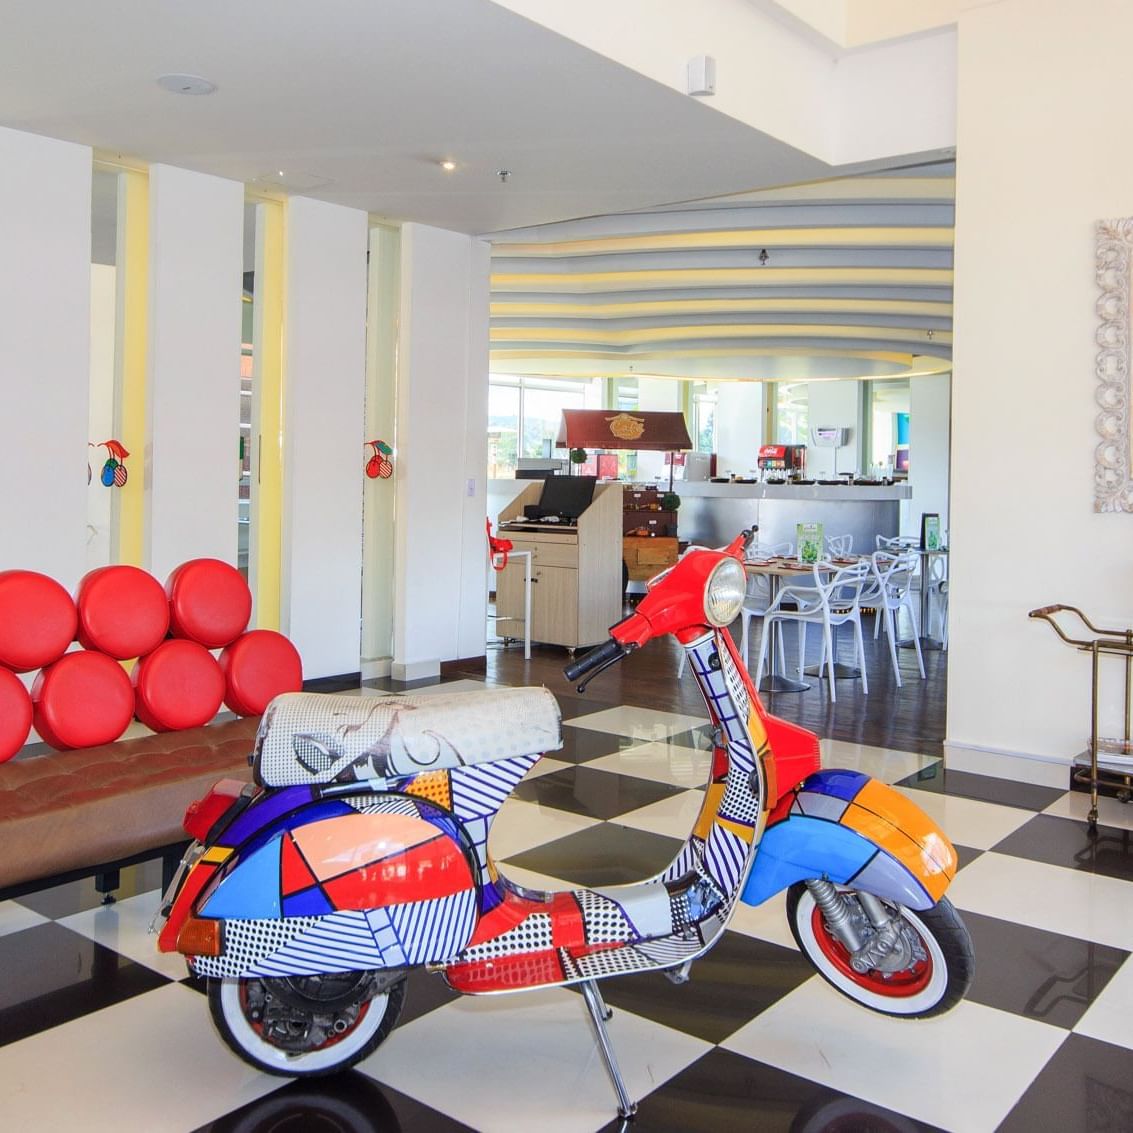 Lobby area with a parked Motor bike décor at POP Art Tocancipa